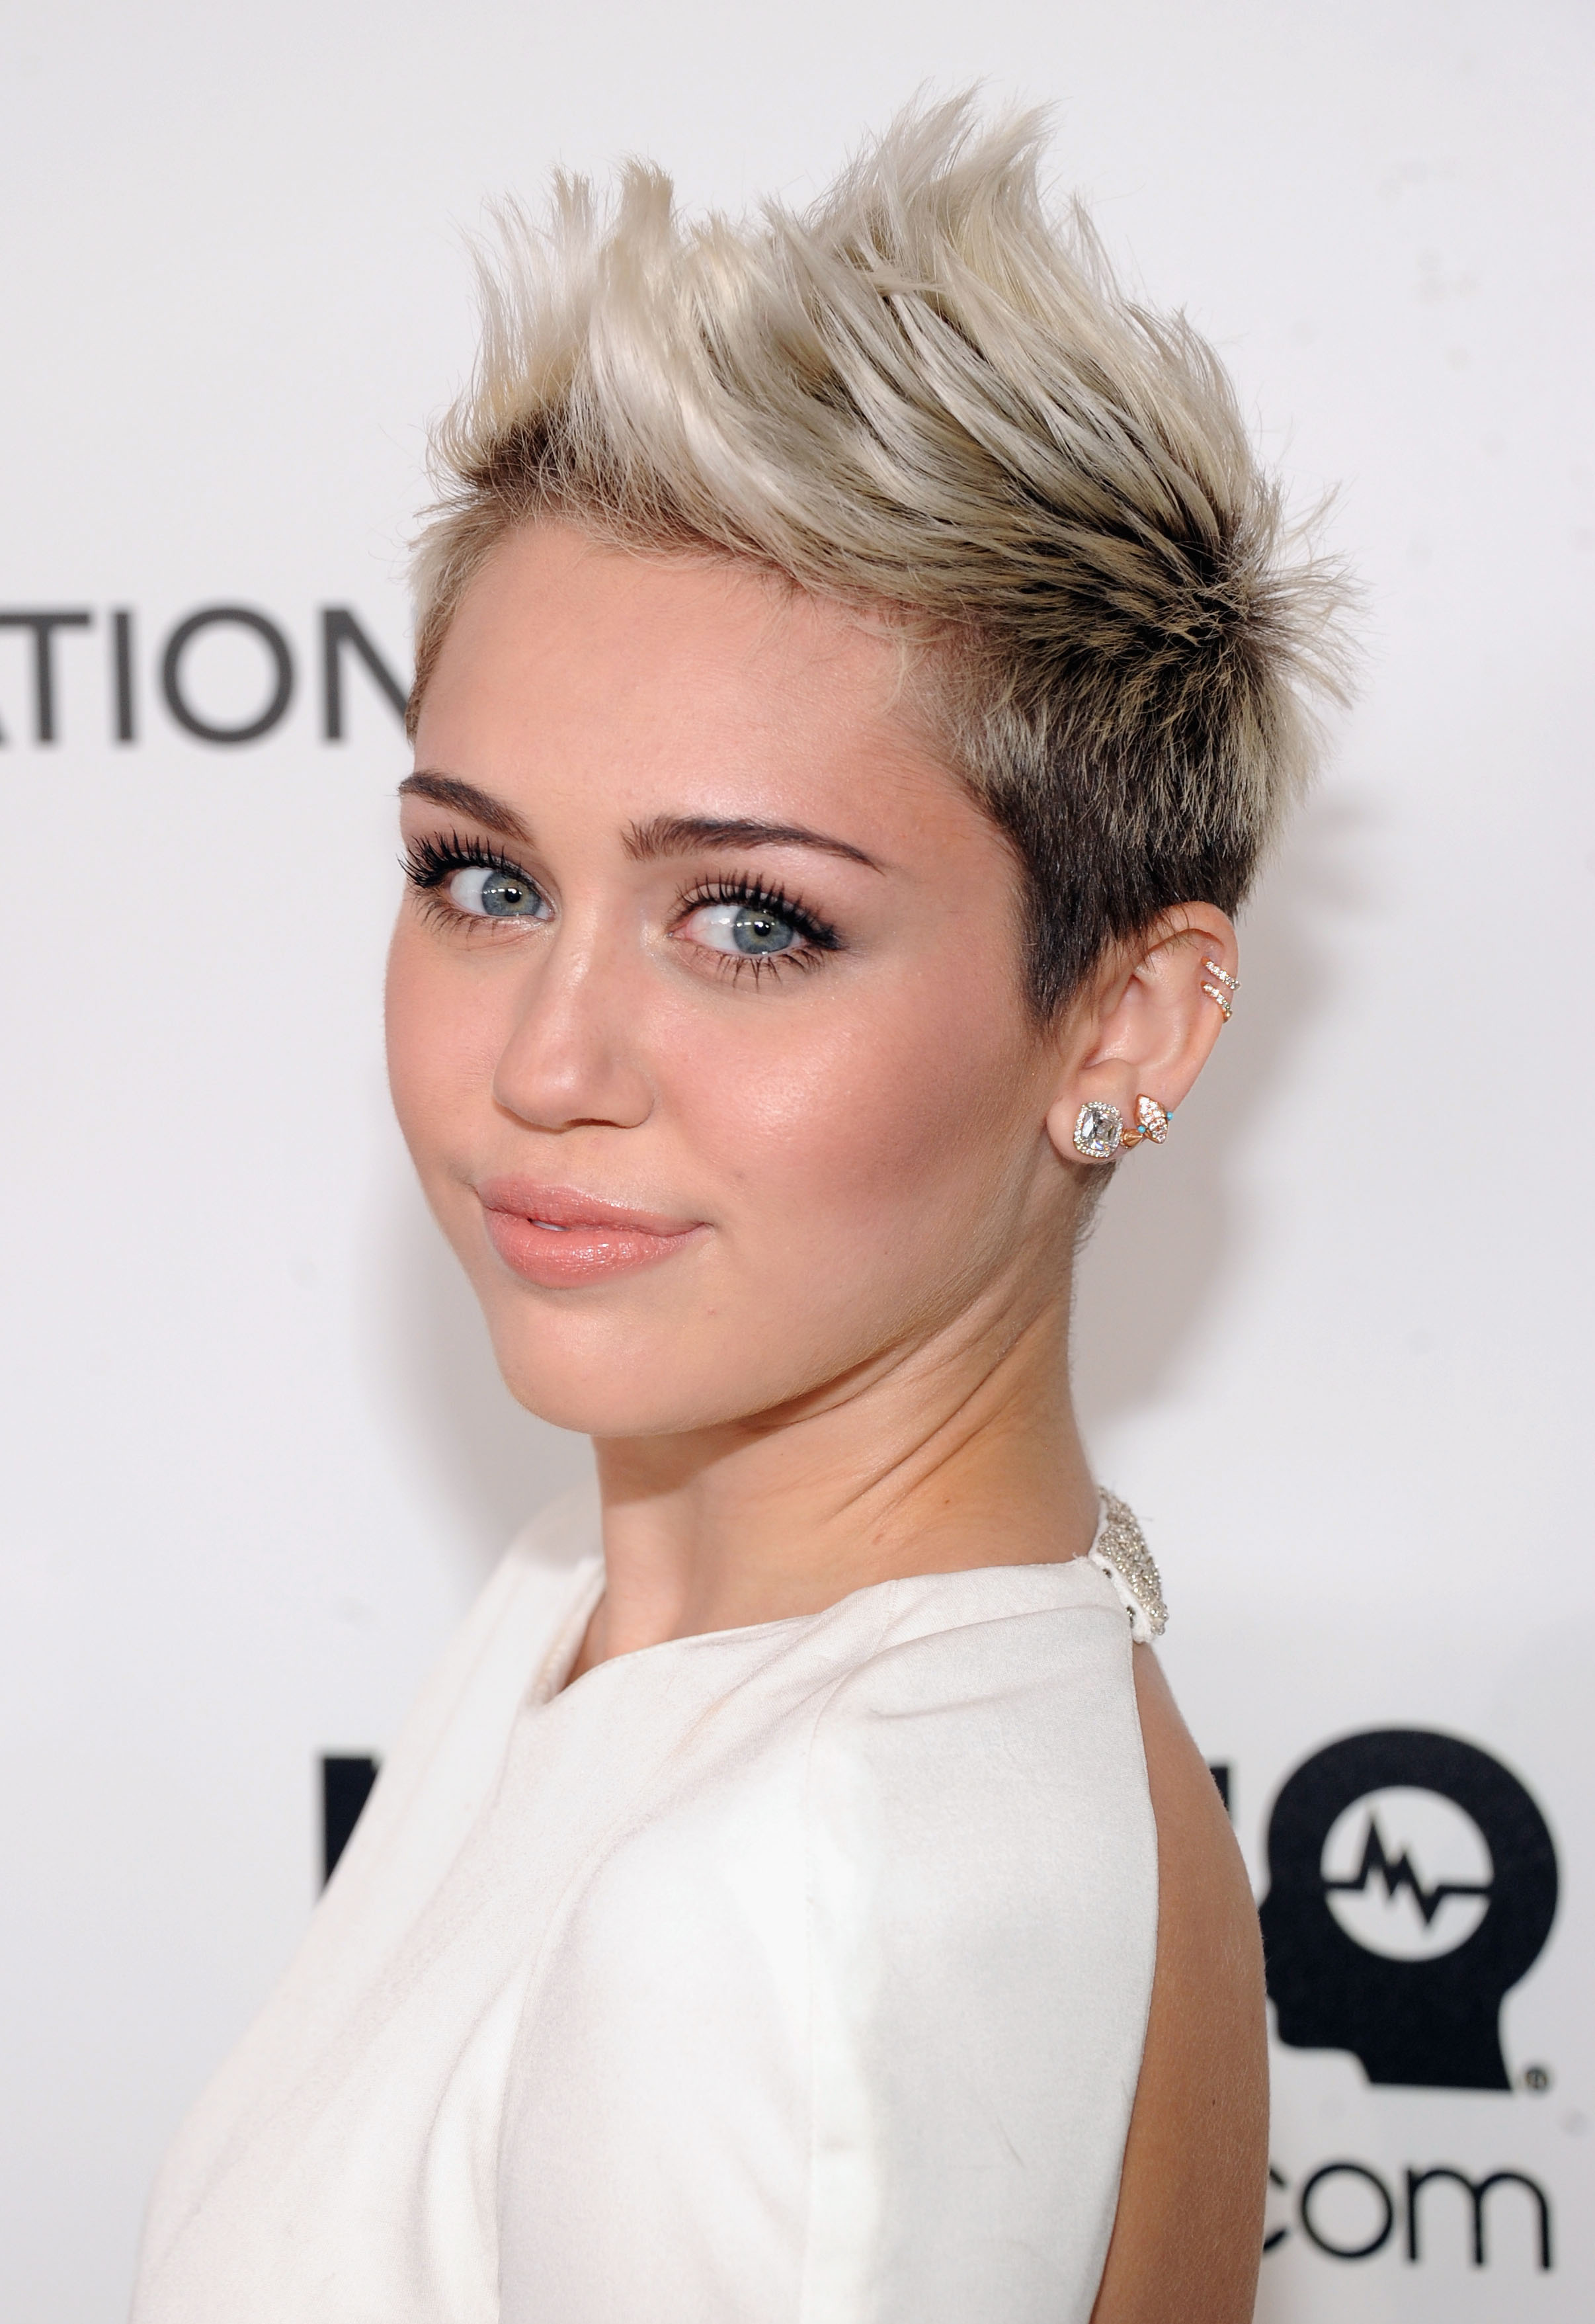 WEST HOLLYWOOD, CA - FEBRUARY 24: Actress/Singer Miley Cyrus attends the 21st Annual Elton John AIDS Foundation Academy Awards Viewing Party at West Hollywood Park on February 24, 2013 in West Hollywood, California. (Photo by Jamie McCarthy/Getty Images for EJAF)